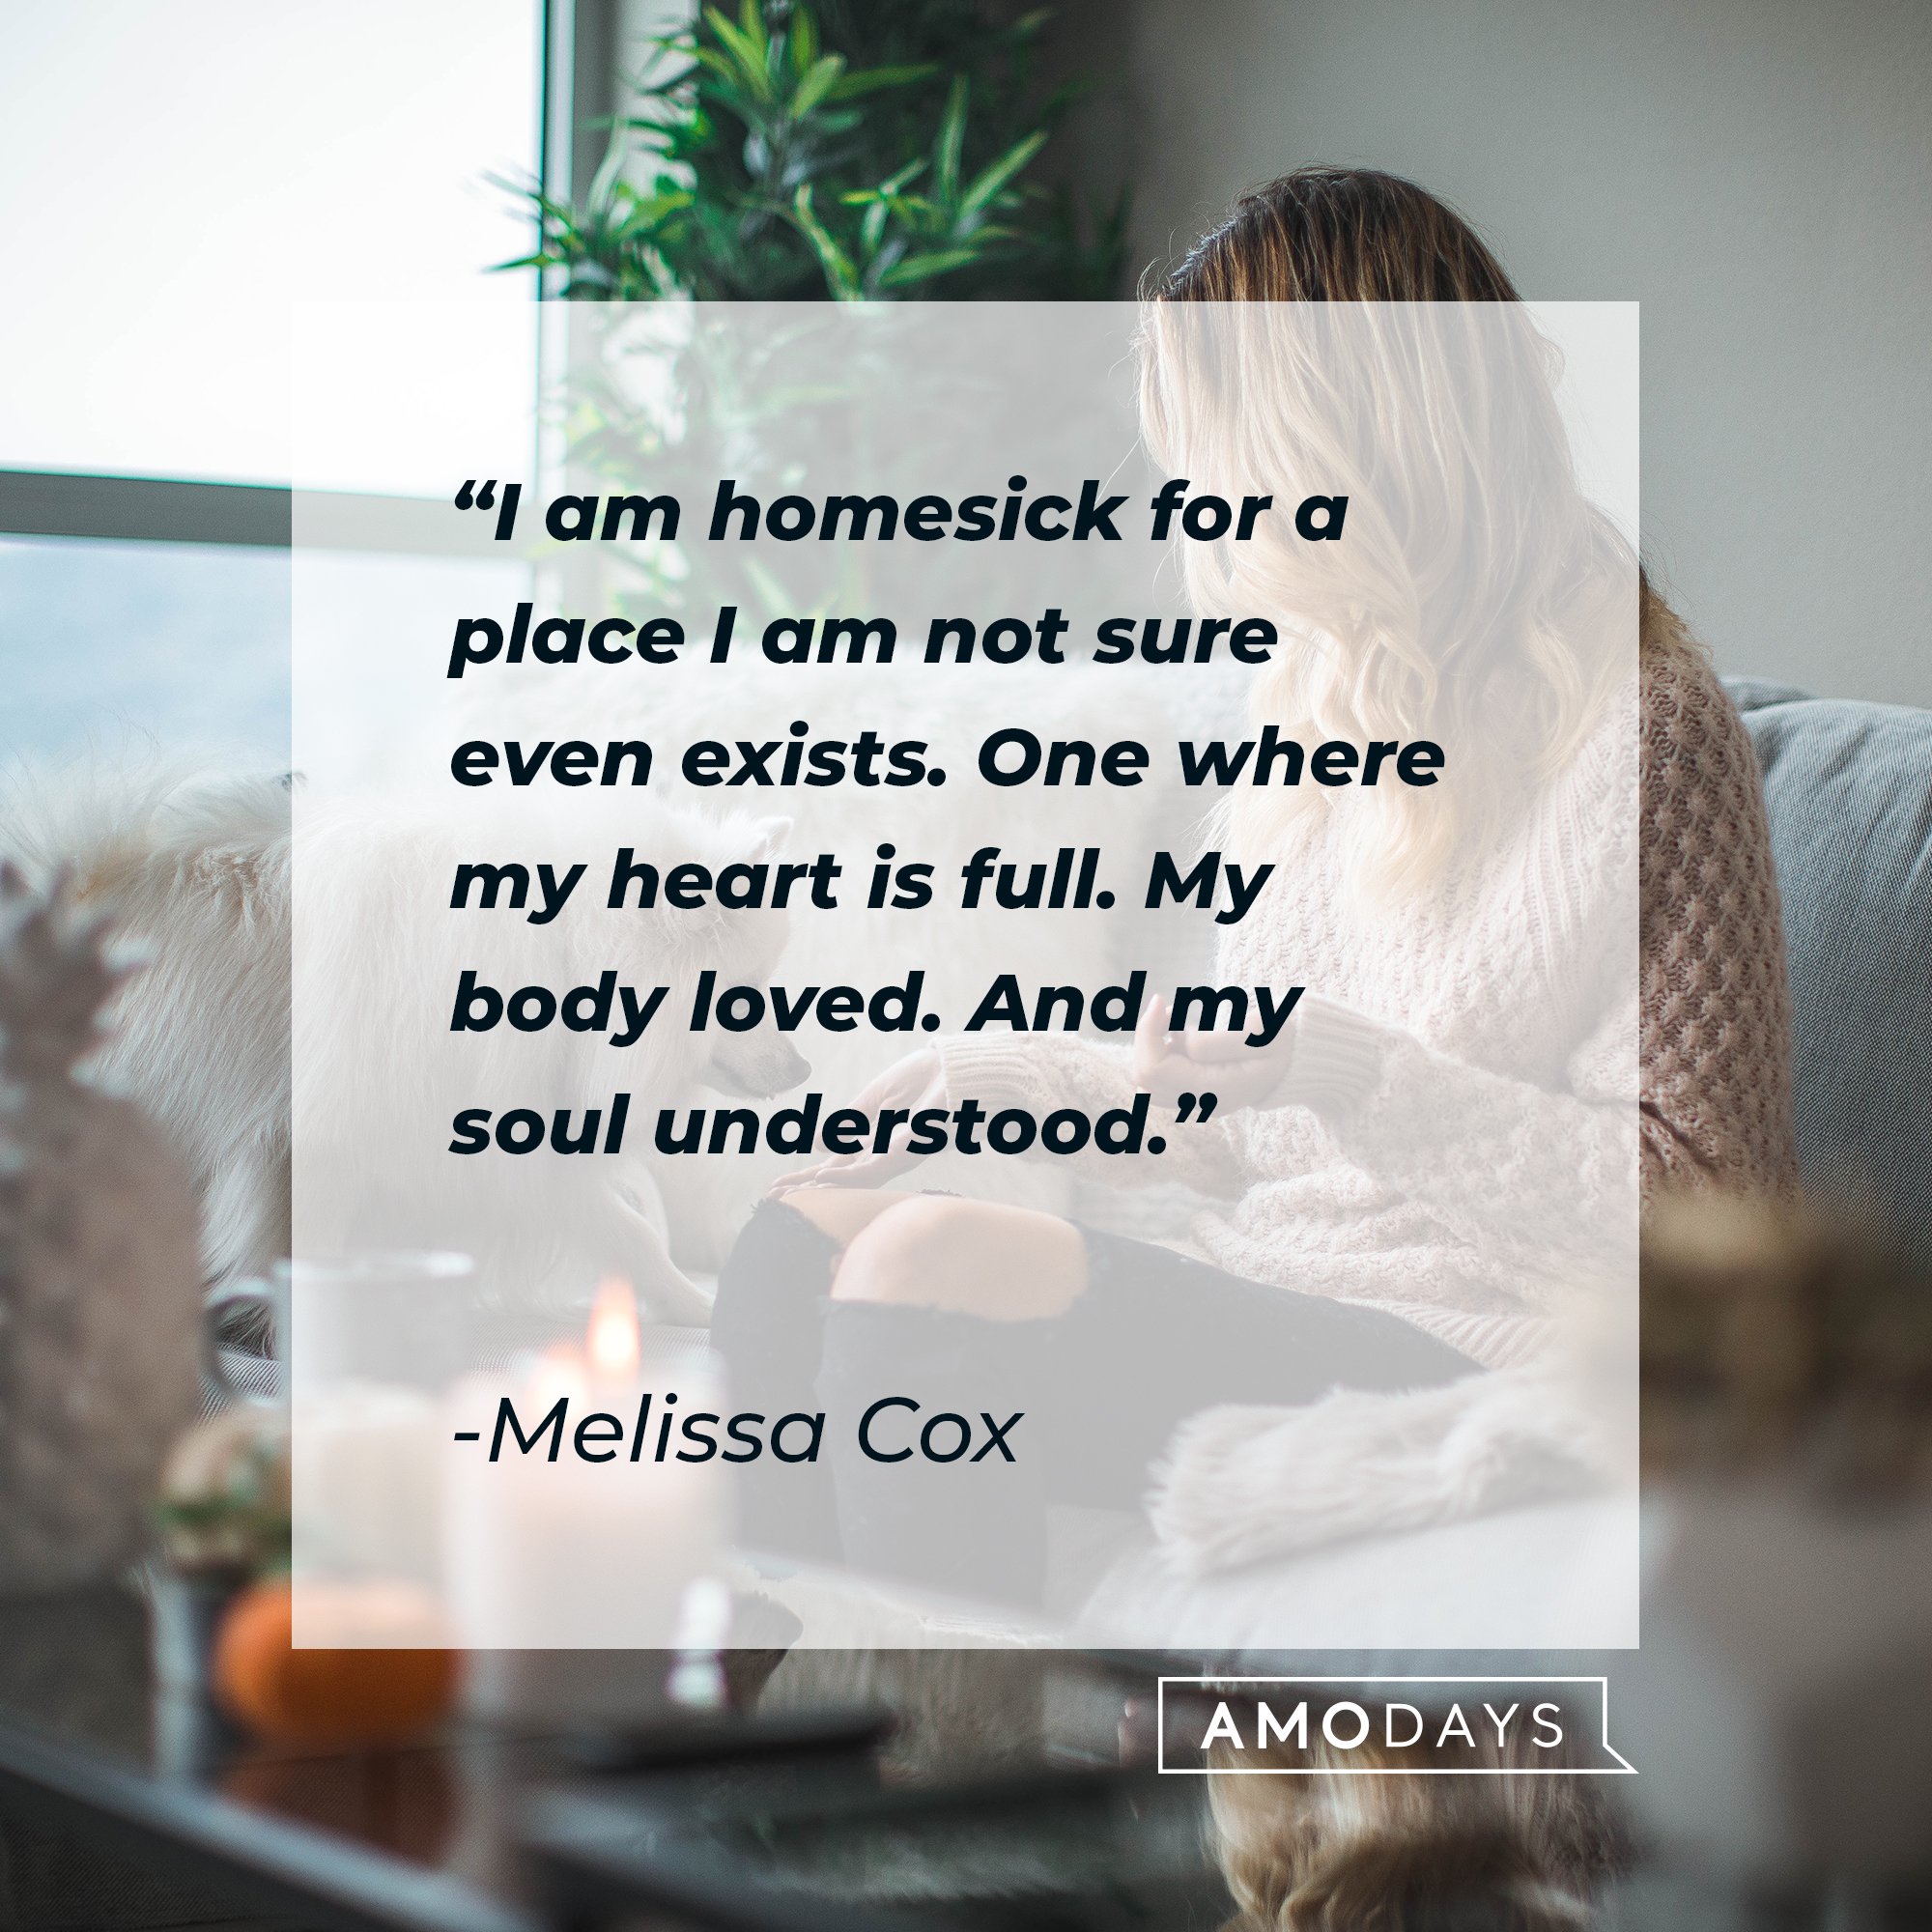 Melissa Cox's quote: "I am homesick for a place I am not sure even exists. One where my heart is full. My body loved. And my soul understood." | Image: AmoDays